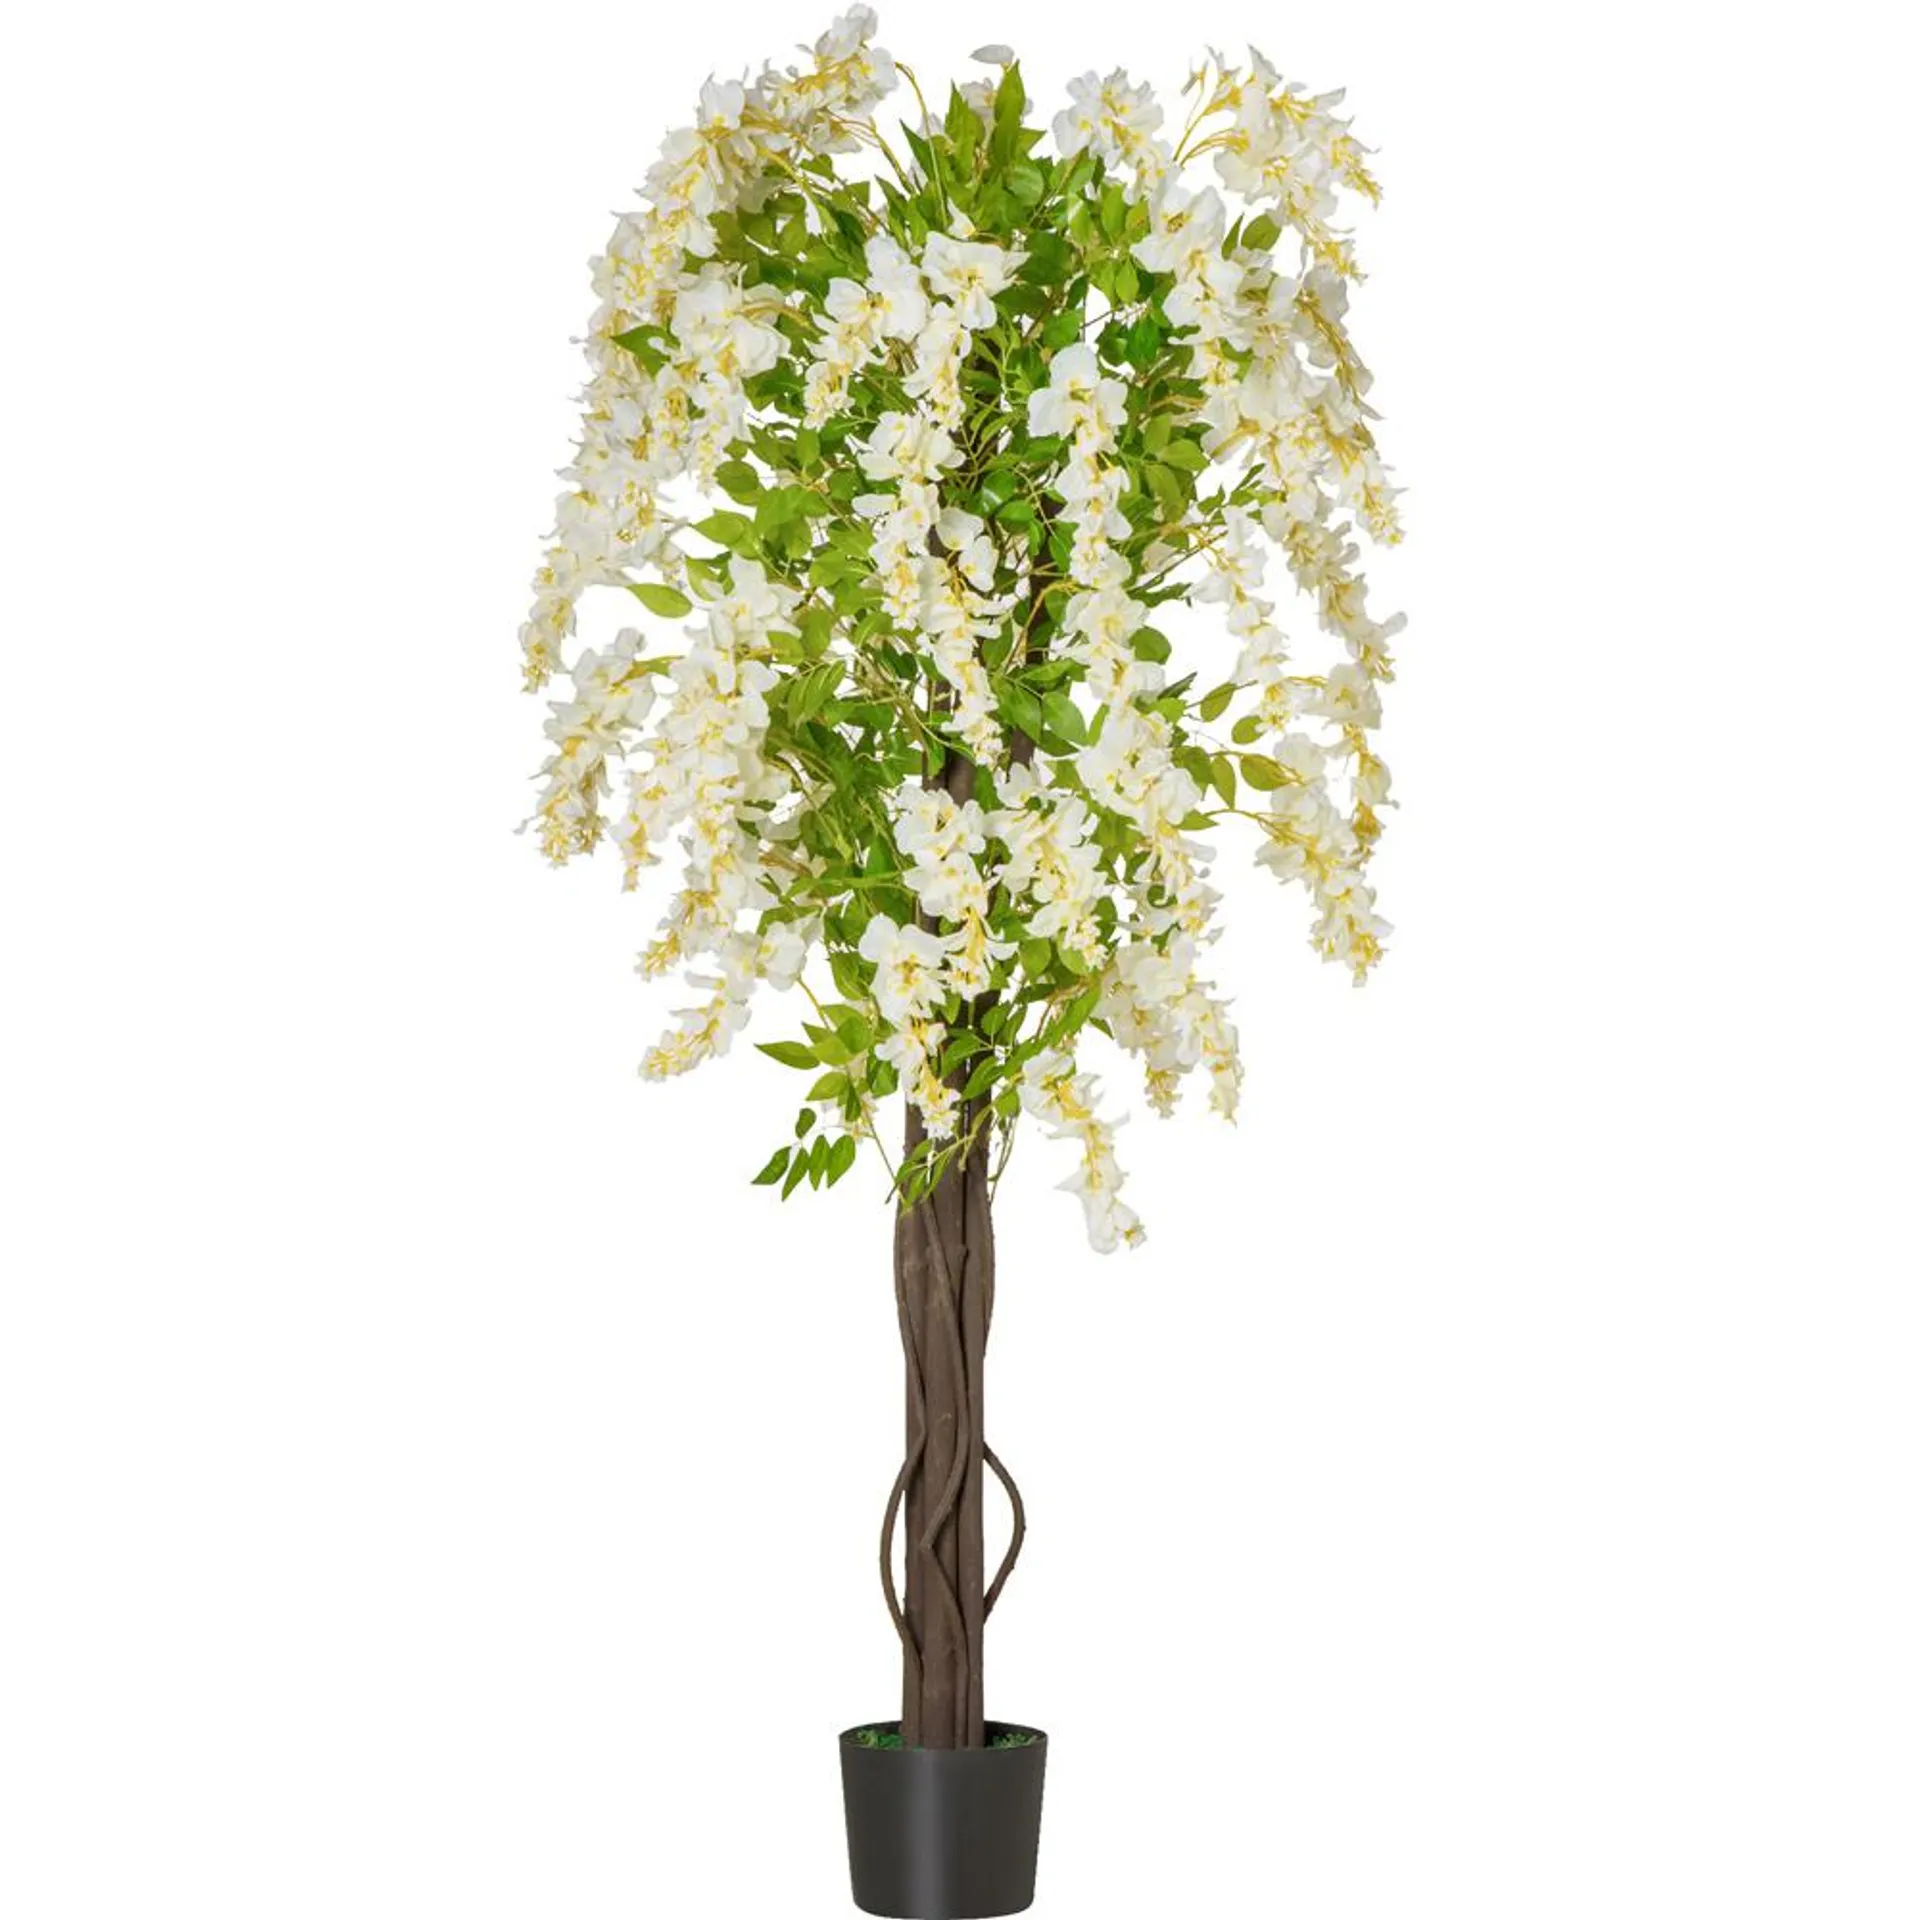 Portland White Flowers Wisteria Tree Artificial Plant In Pot 5.2ft